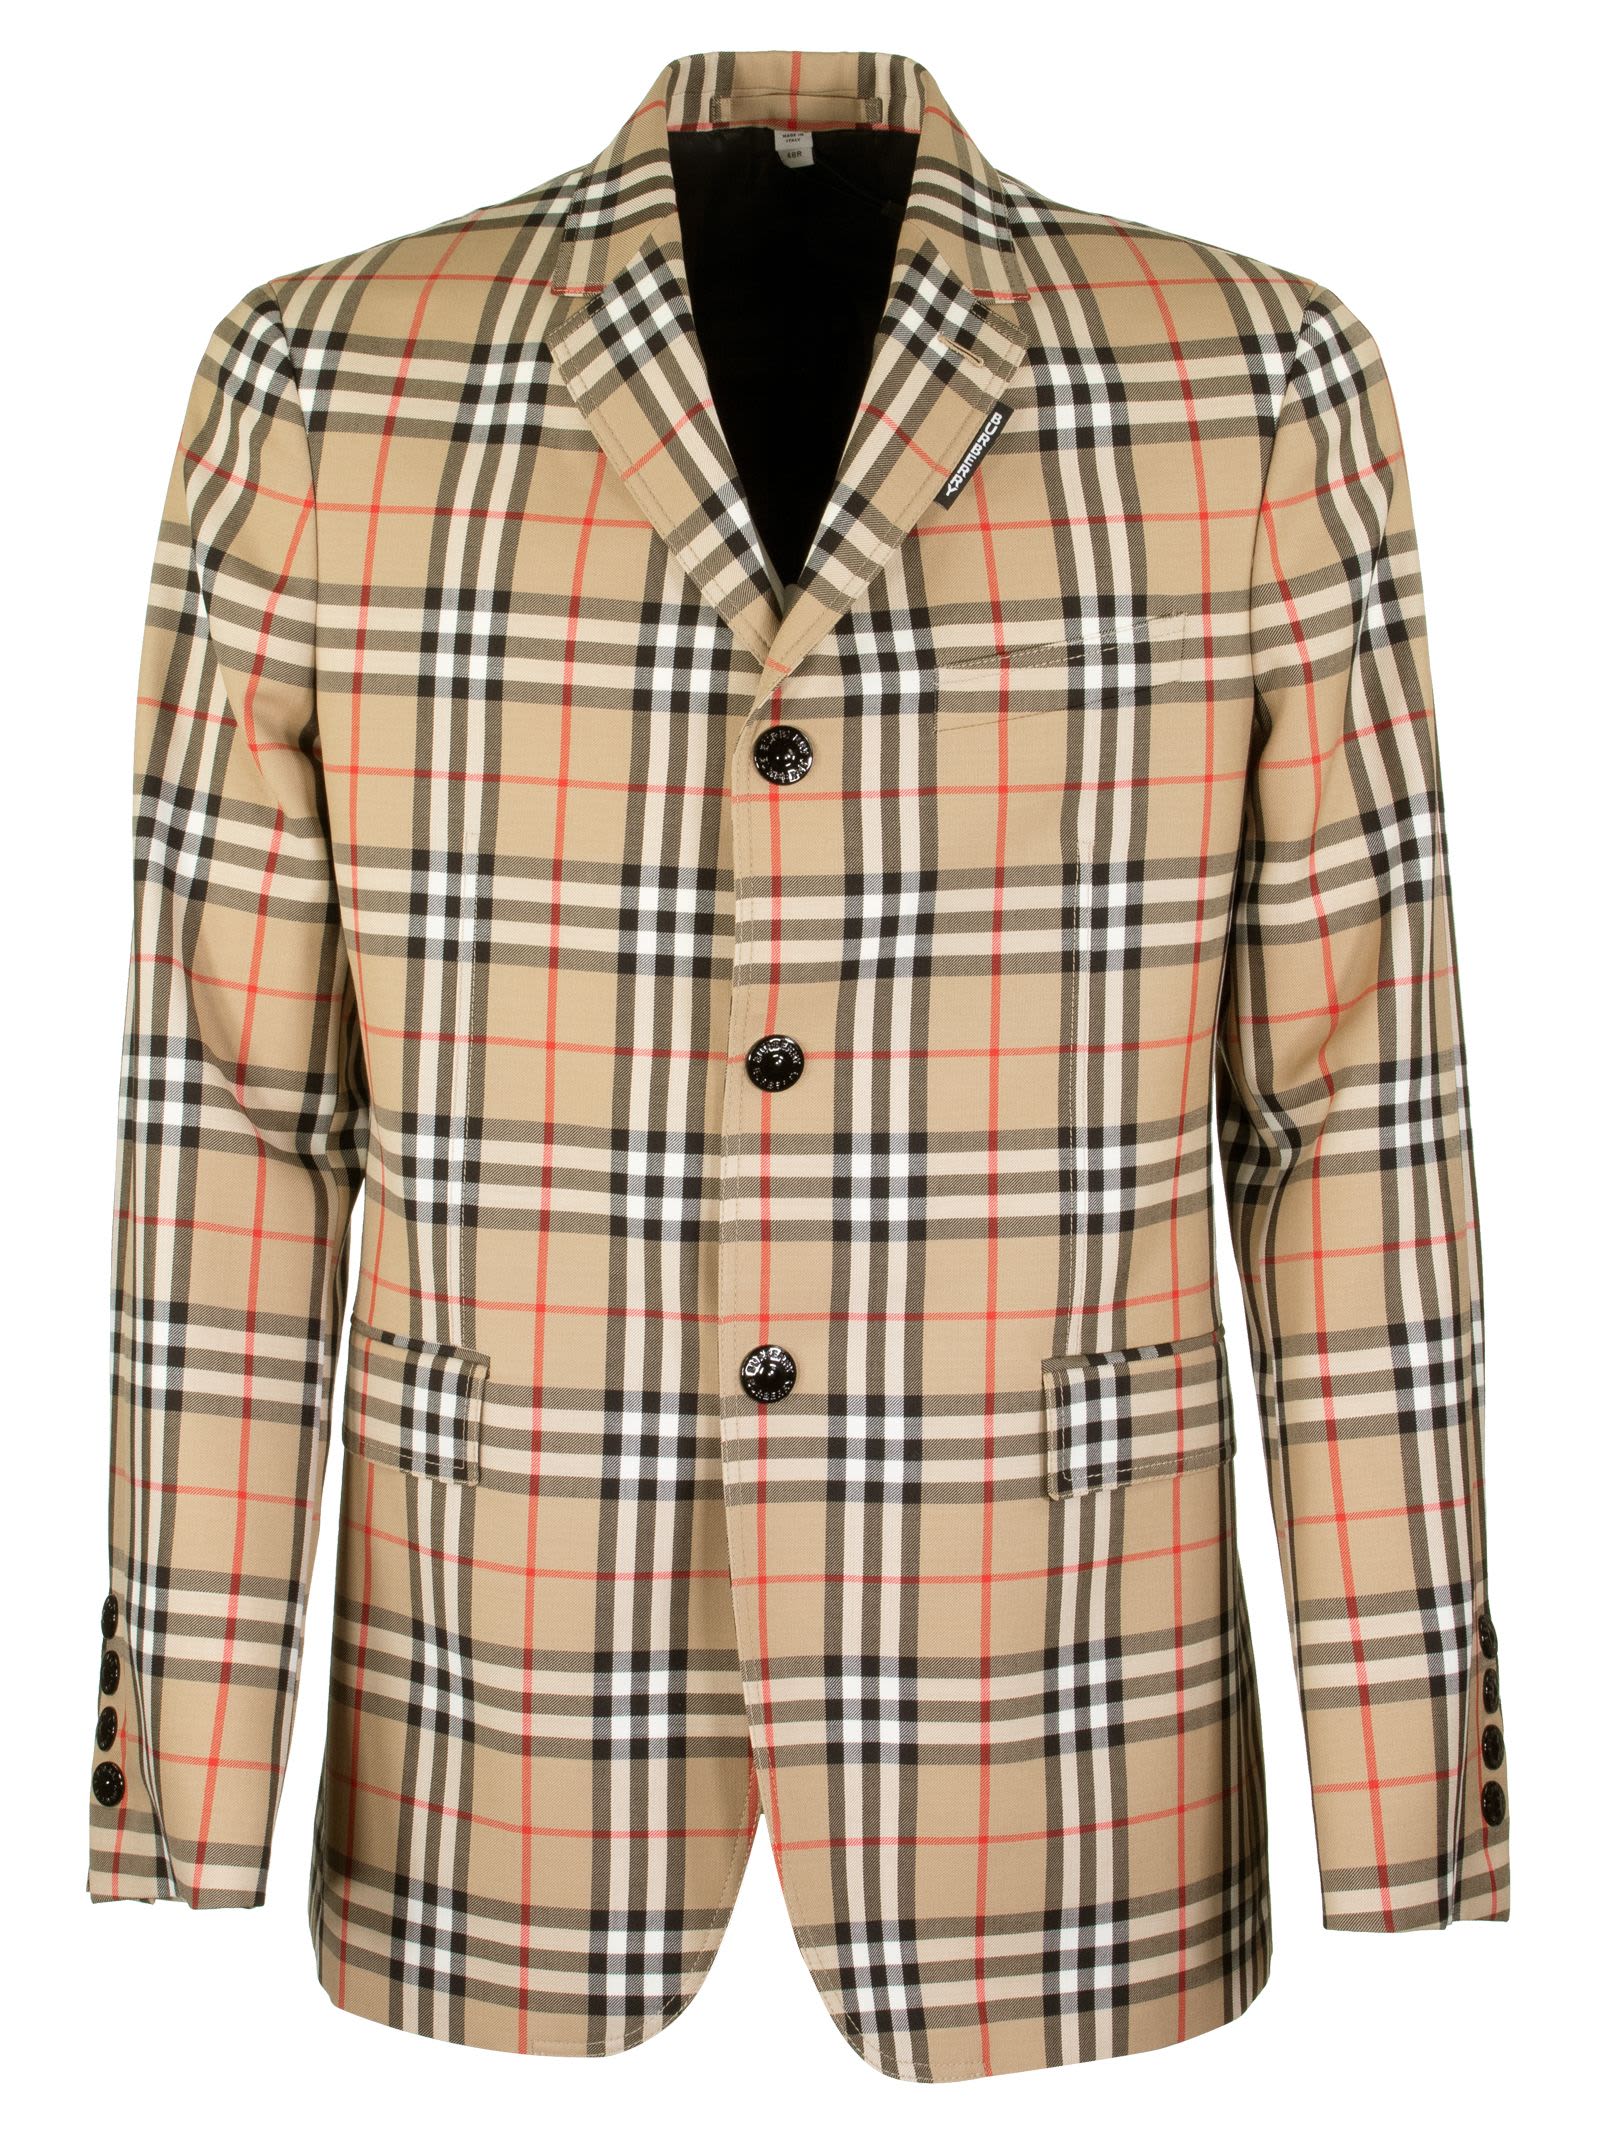 BURBERRY SLIM FIT VINTAGE CHECK WOOL MOHAIR TAILORED JACKET,11223895